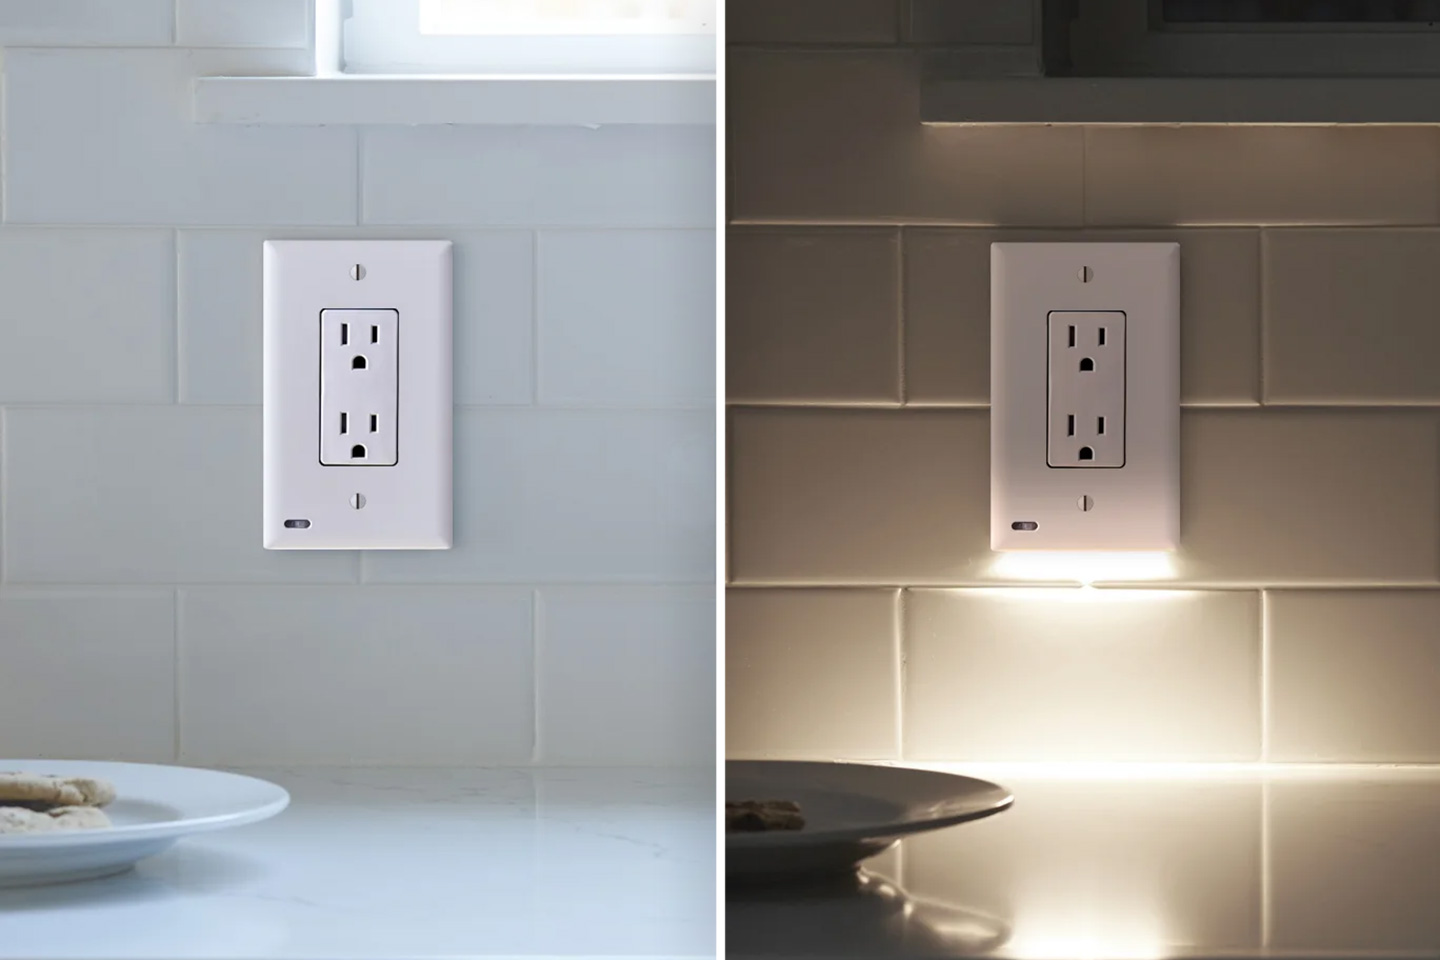 #LED-enabled Switchboard automatically turns on in the dark to guide you through hallways at night